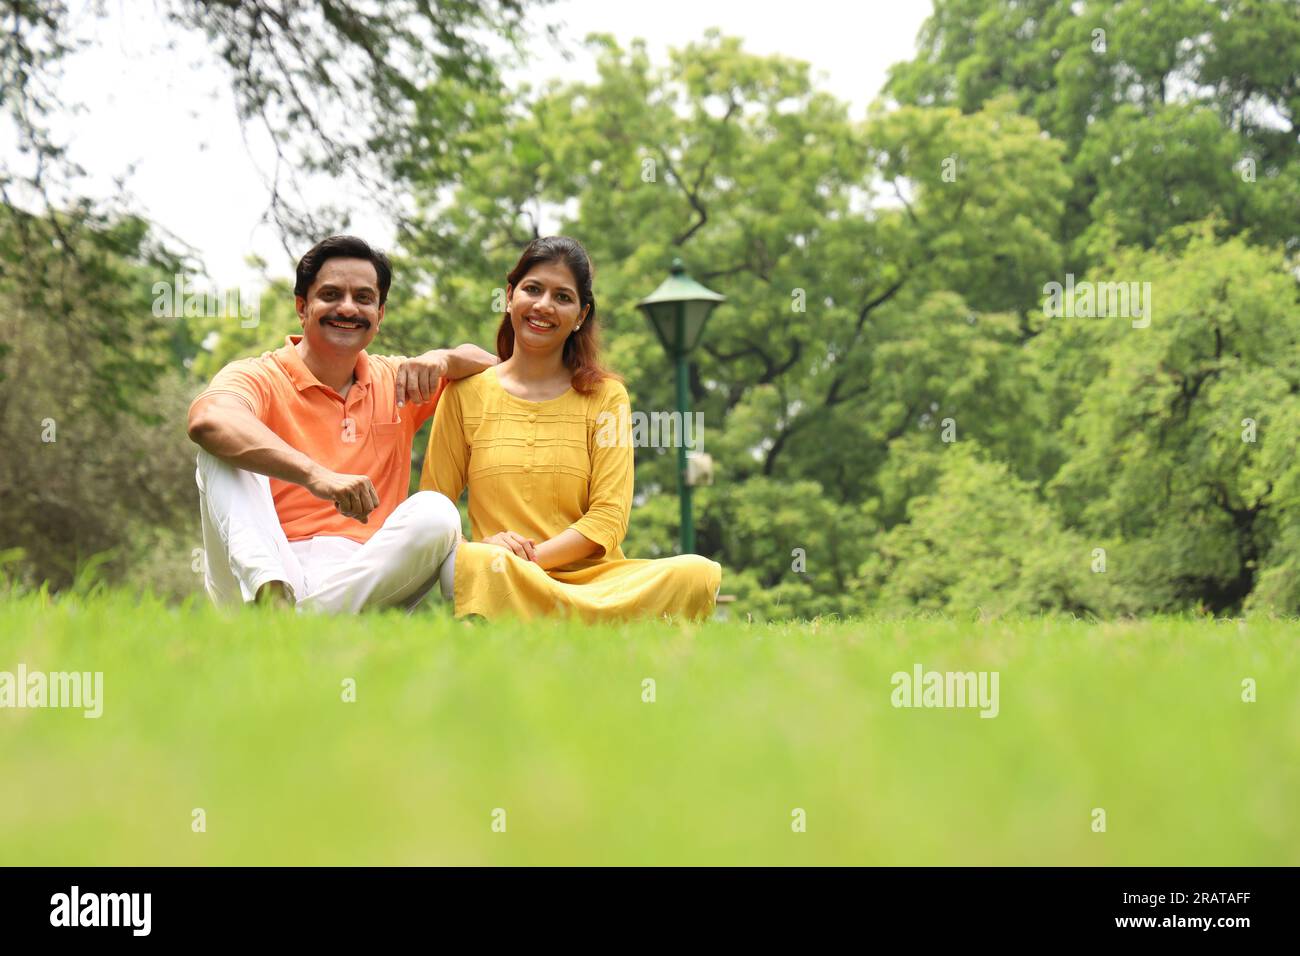 Young happy couple leaning together on grass in a public park early morning in positive atmosphere. Green, tranquil and serene environment. Stock Photo